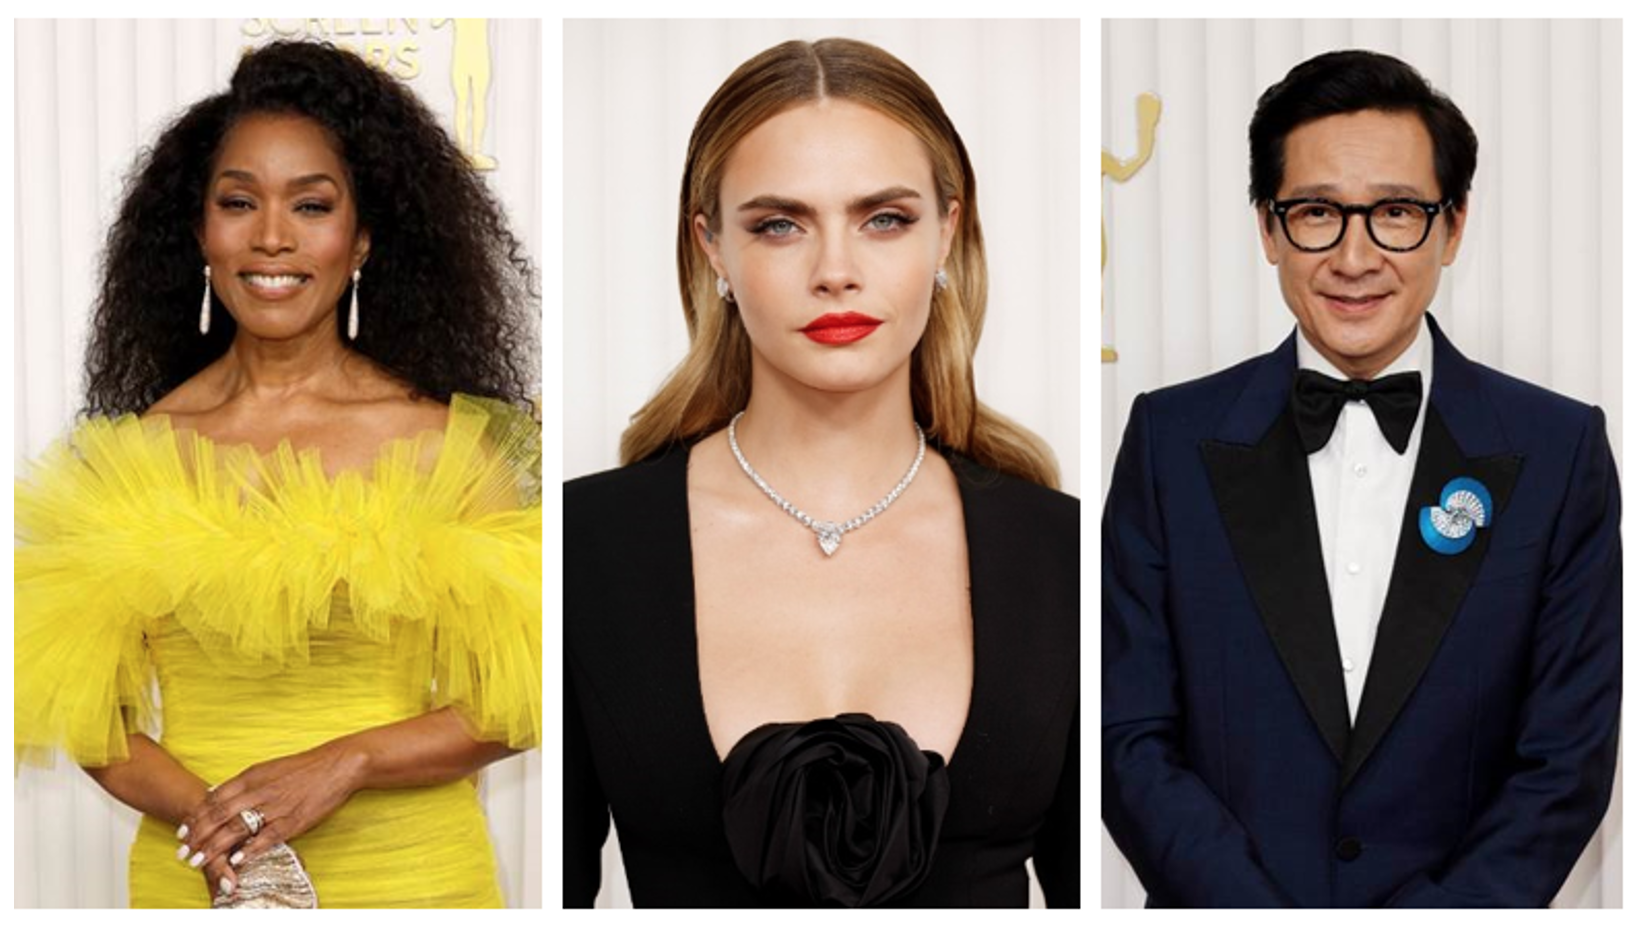 From left to right: Angela Bassett, Cara Delevingne and Ke Huy Quan in De Beers Jewellers